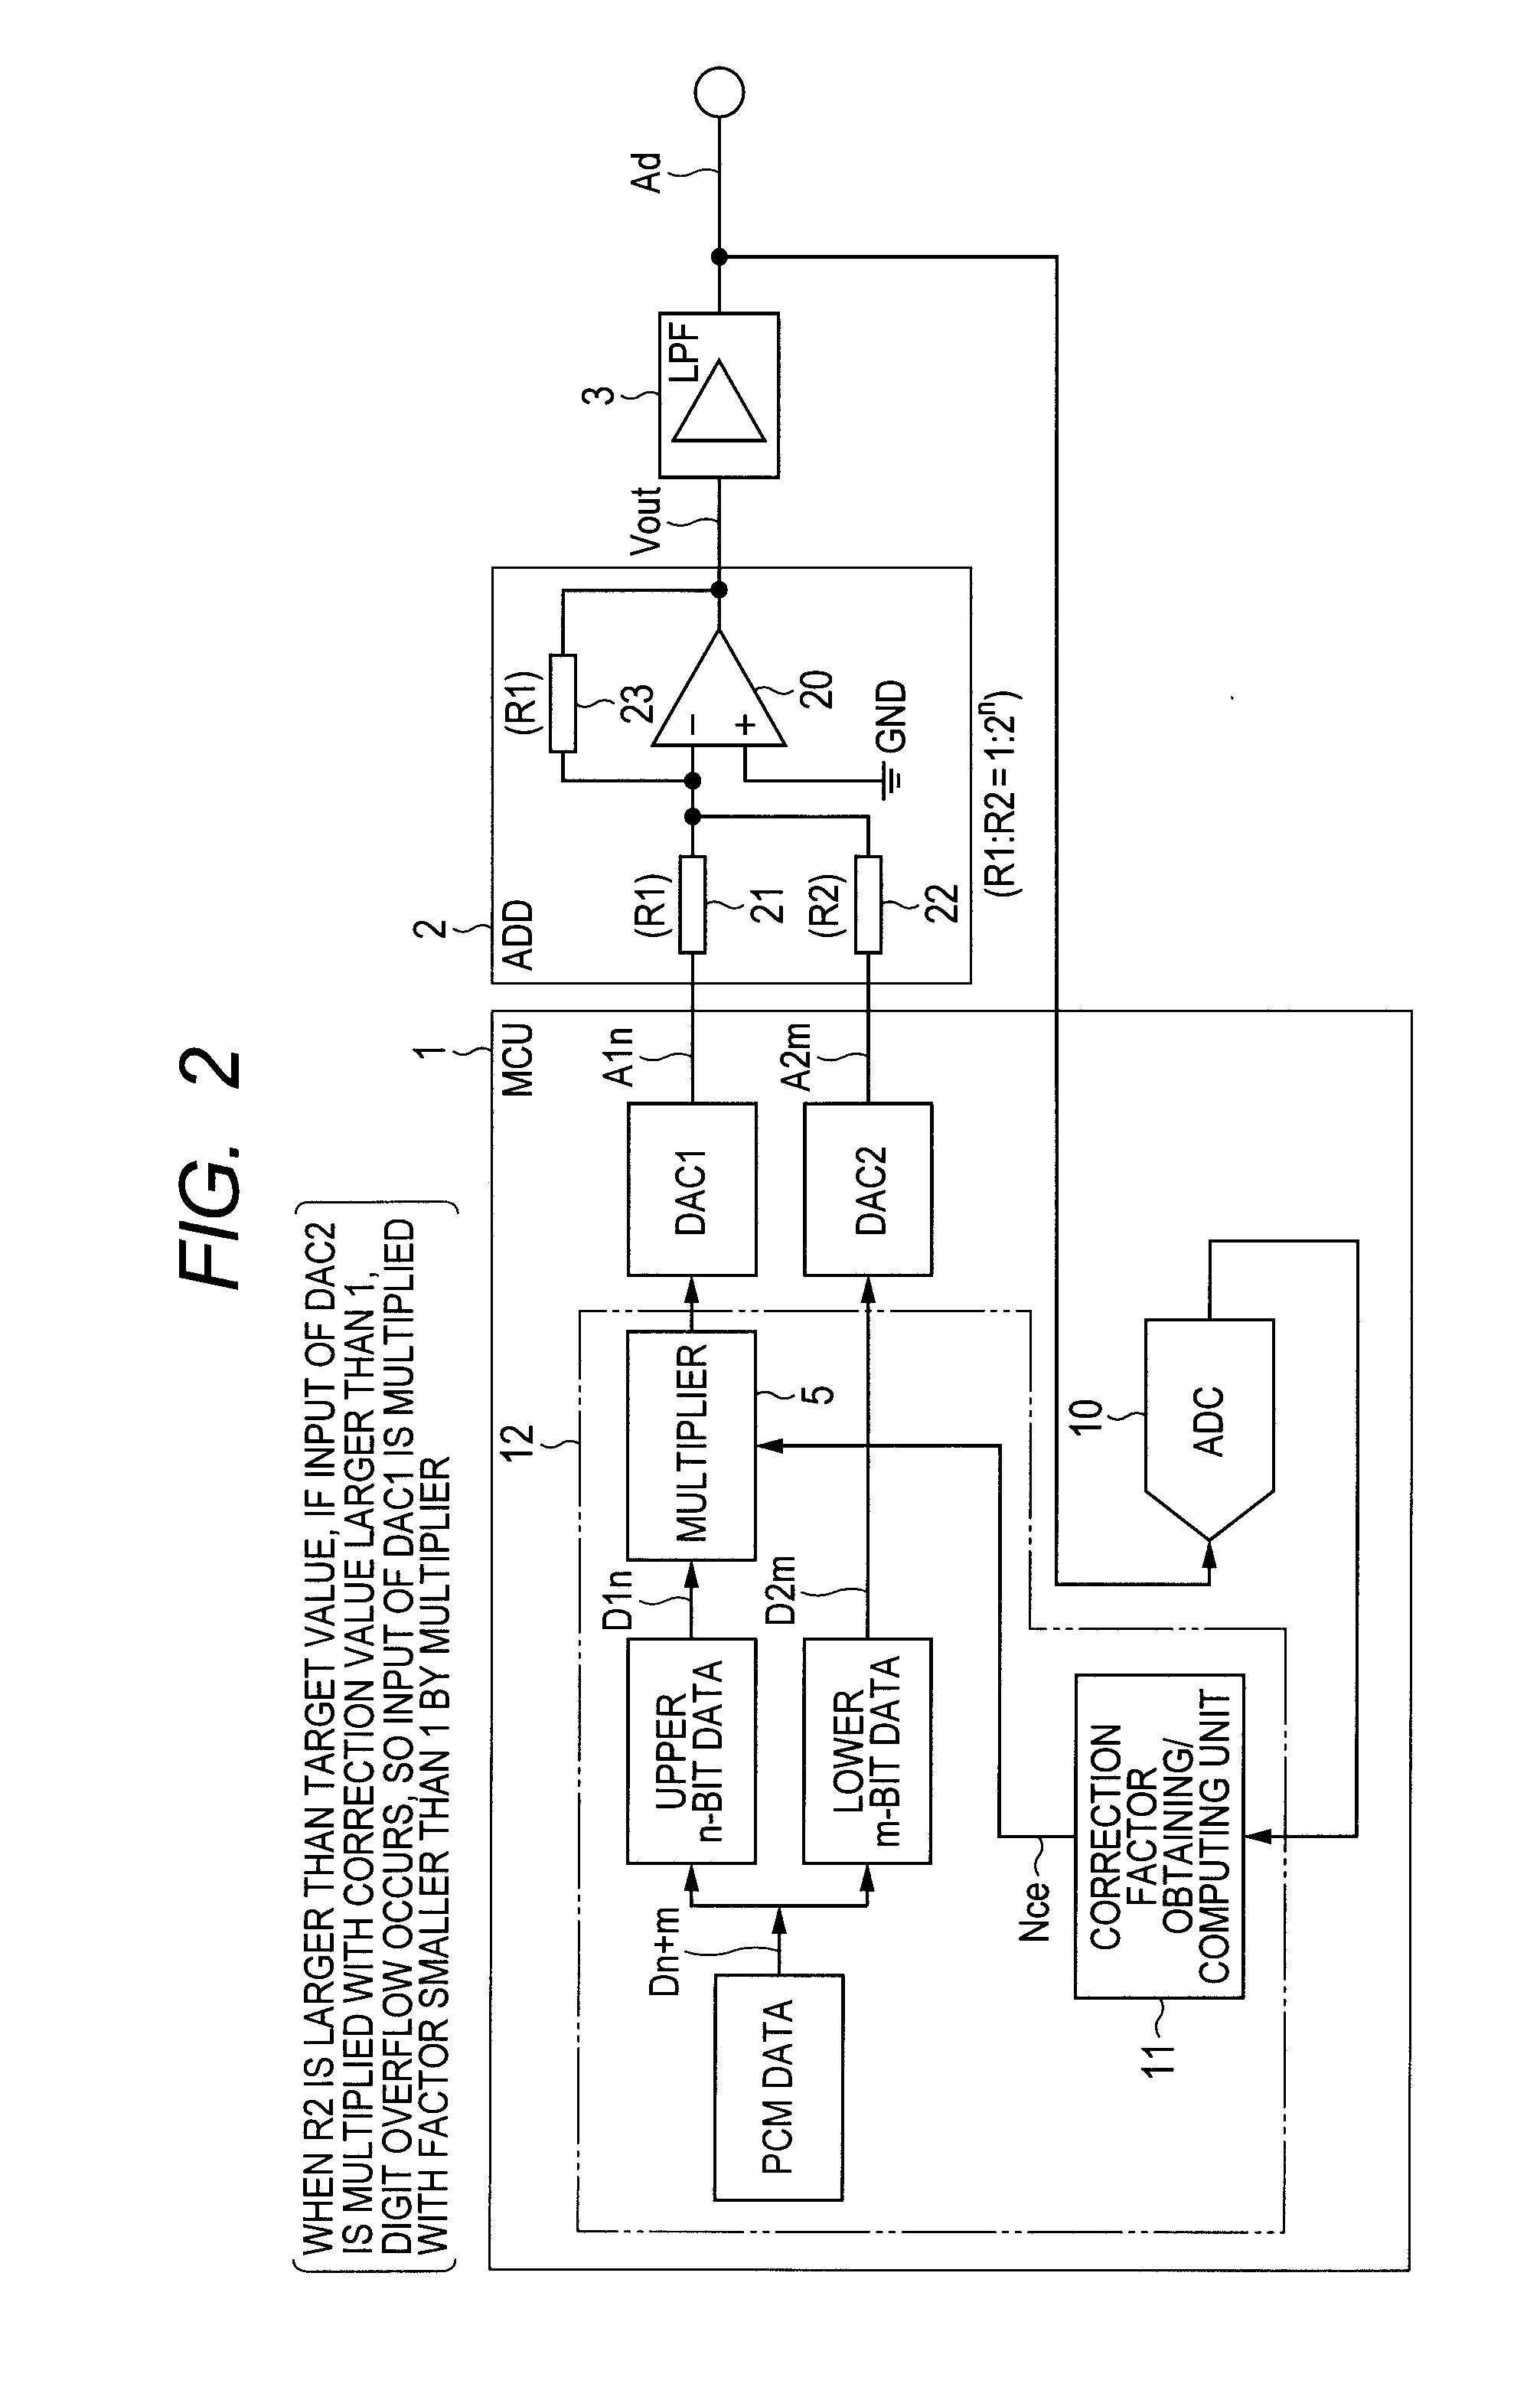 System and Method For Providing High Resolution Digital-To-Analog Conversion Using Low Resolution Digital-To-Analog Converters